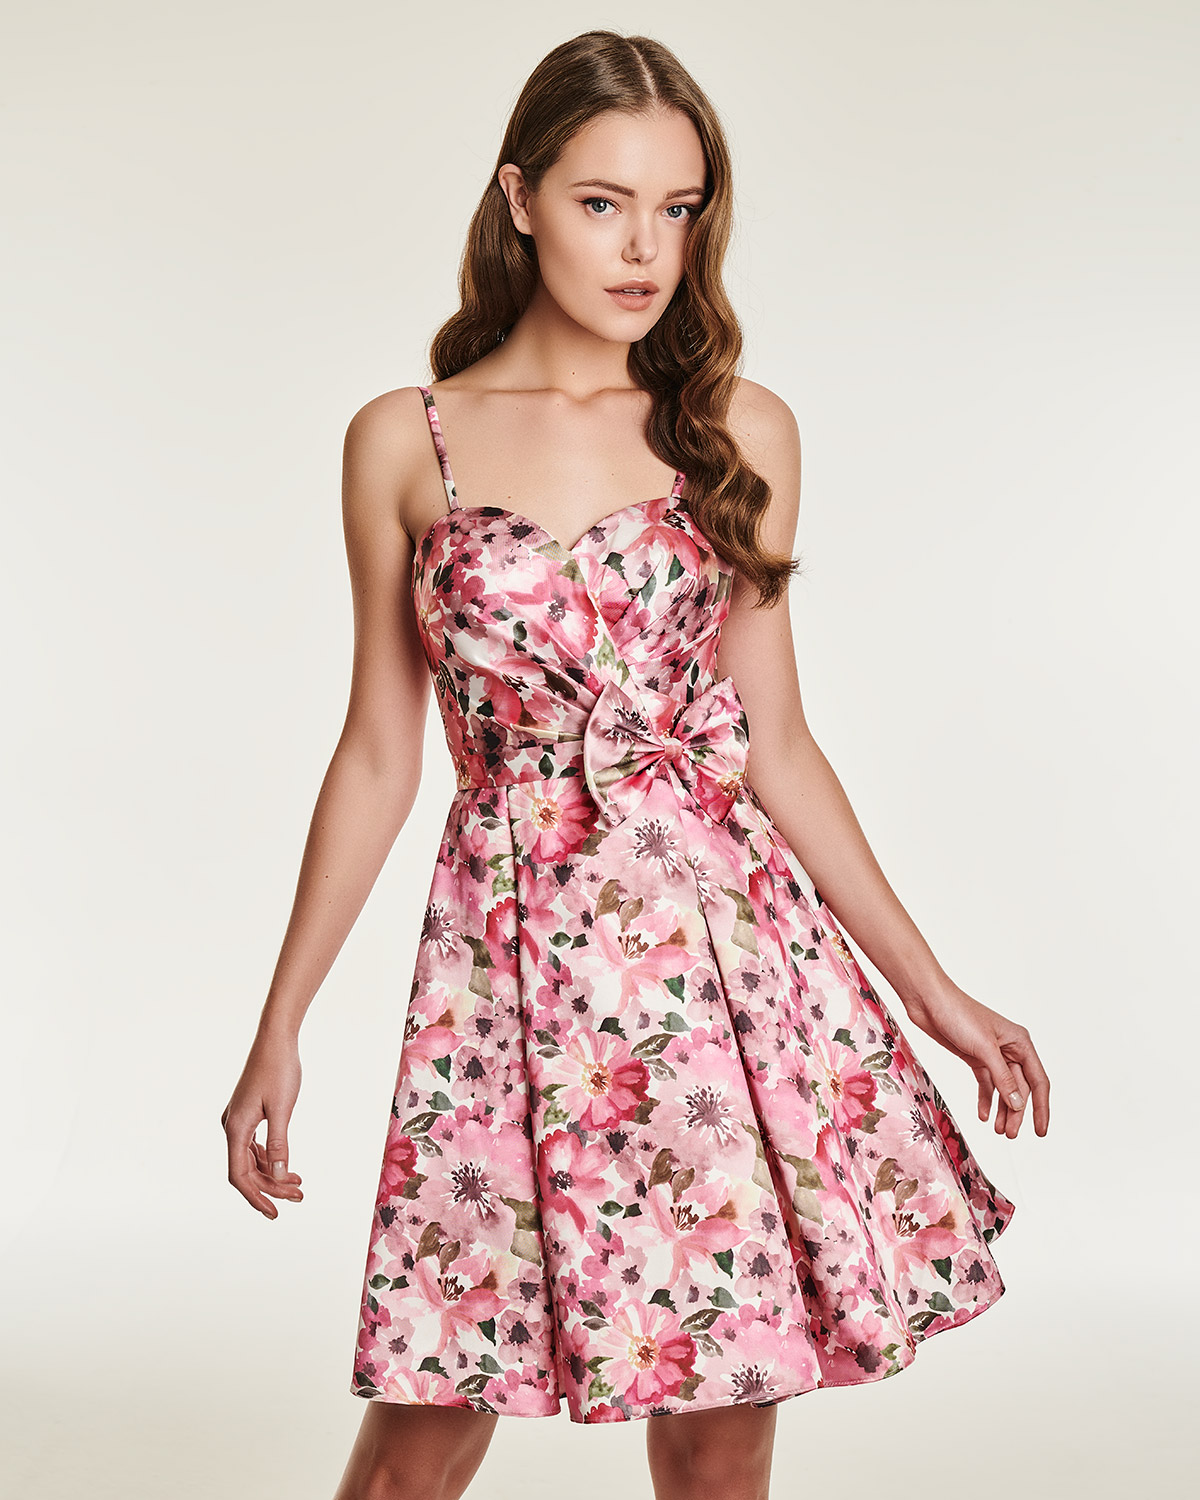 Cocktail Dresses / Cocktail strapless floral dress with a bow in the waist